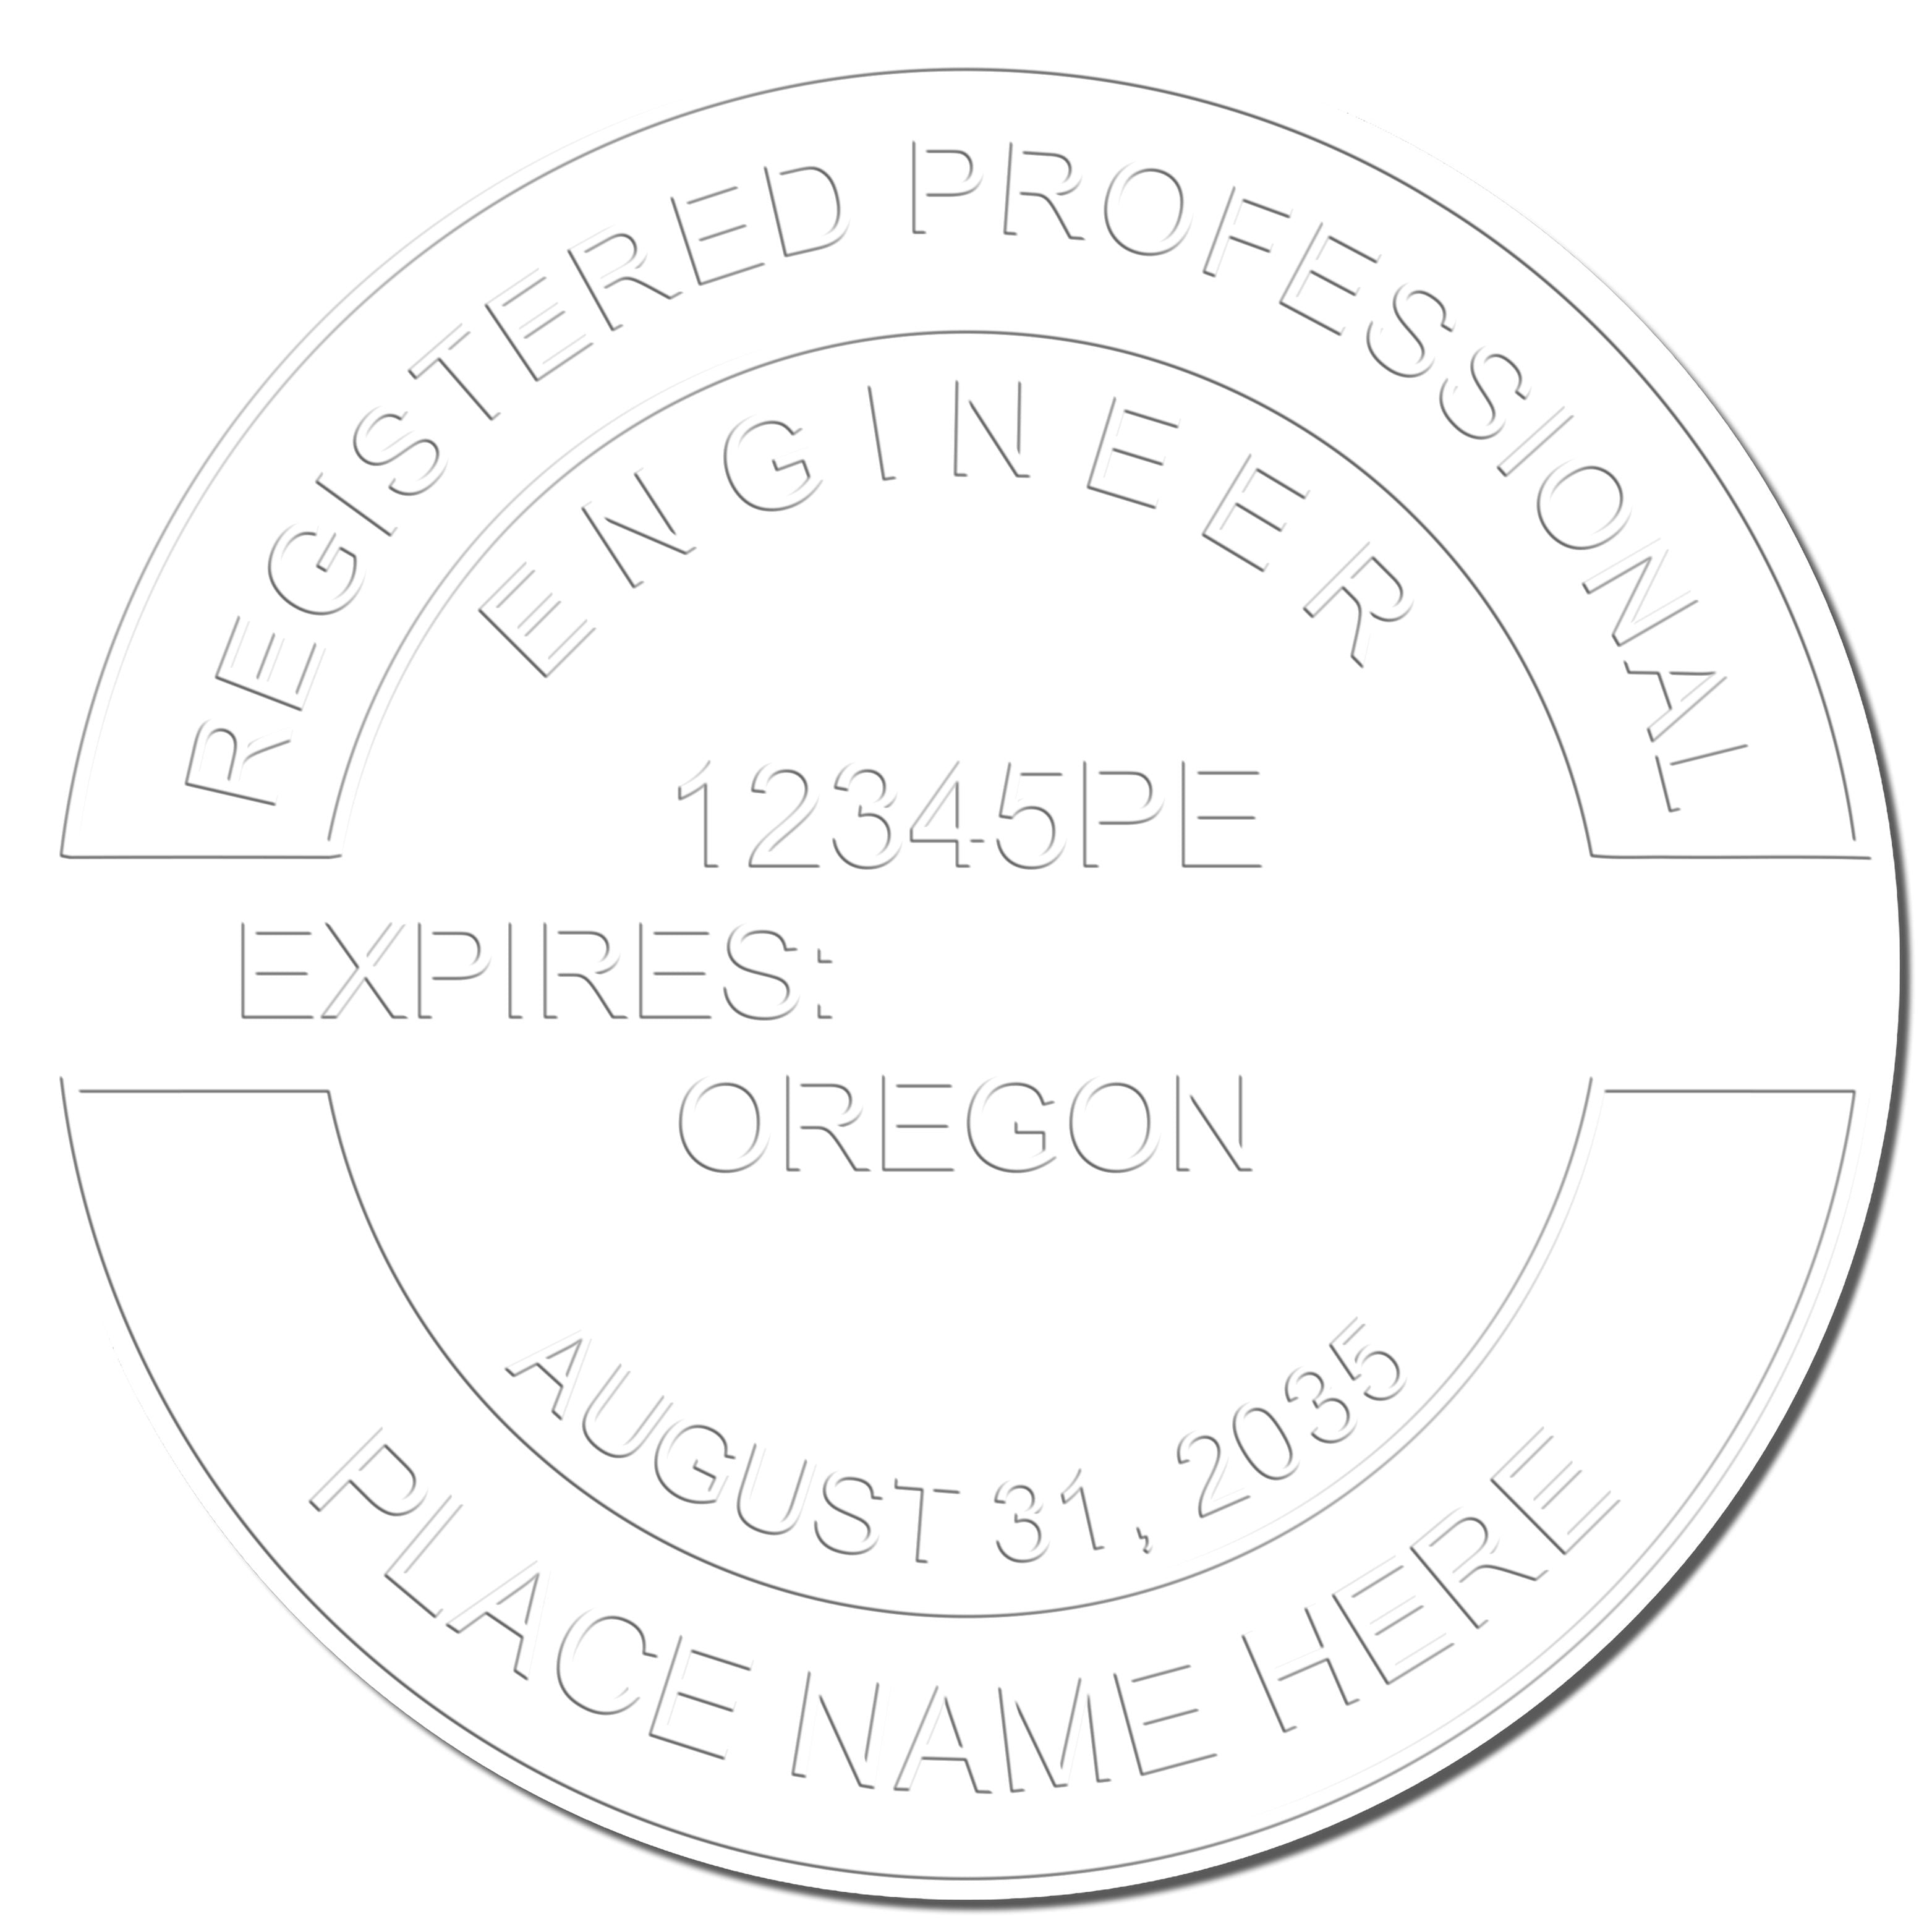 Another Example of a stamped impression of the Oregon Engineer Desk Seal on a piece of office paper.